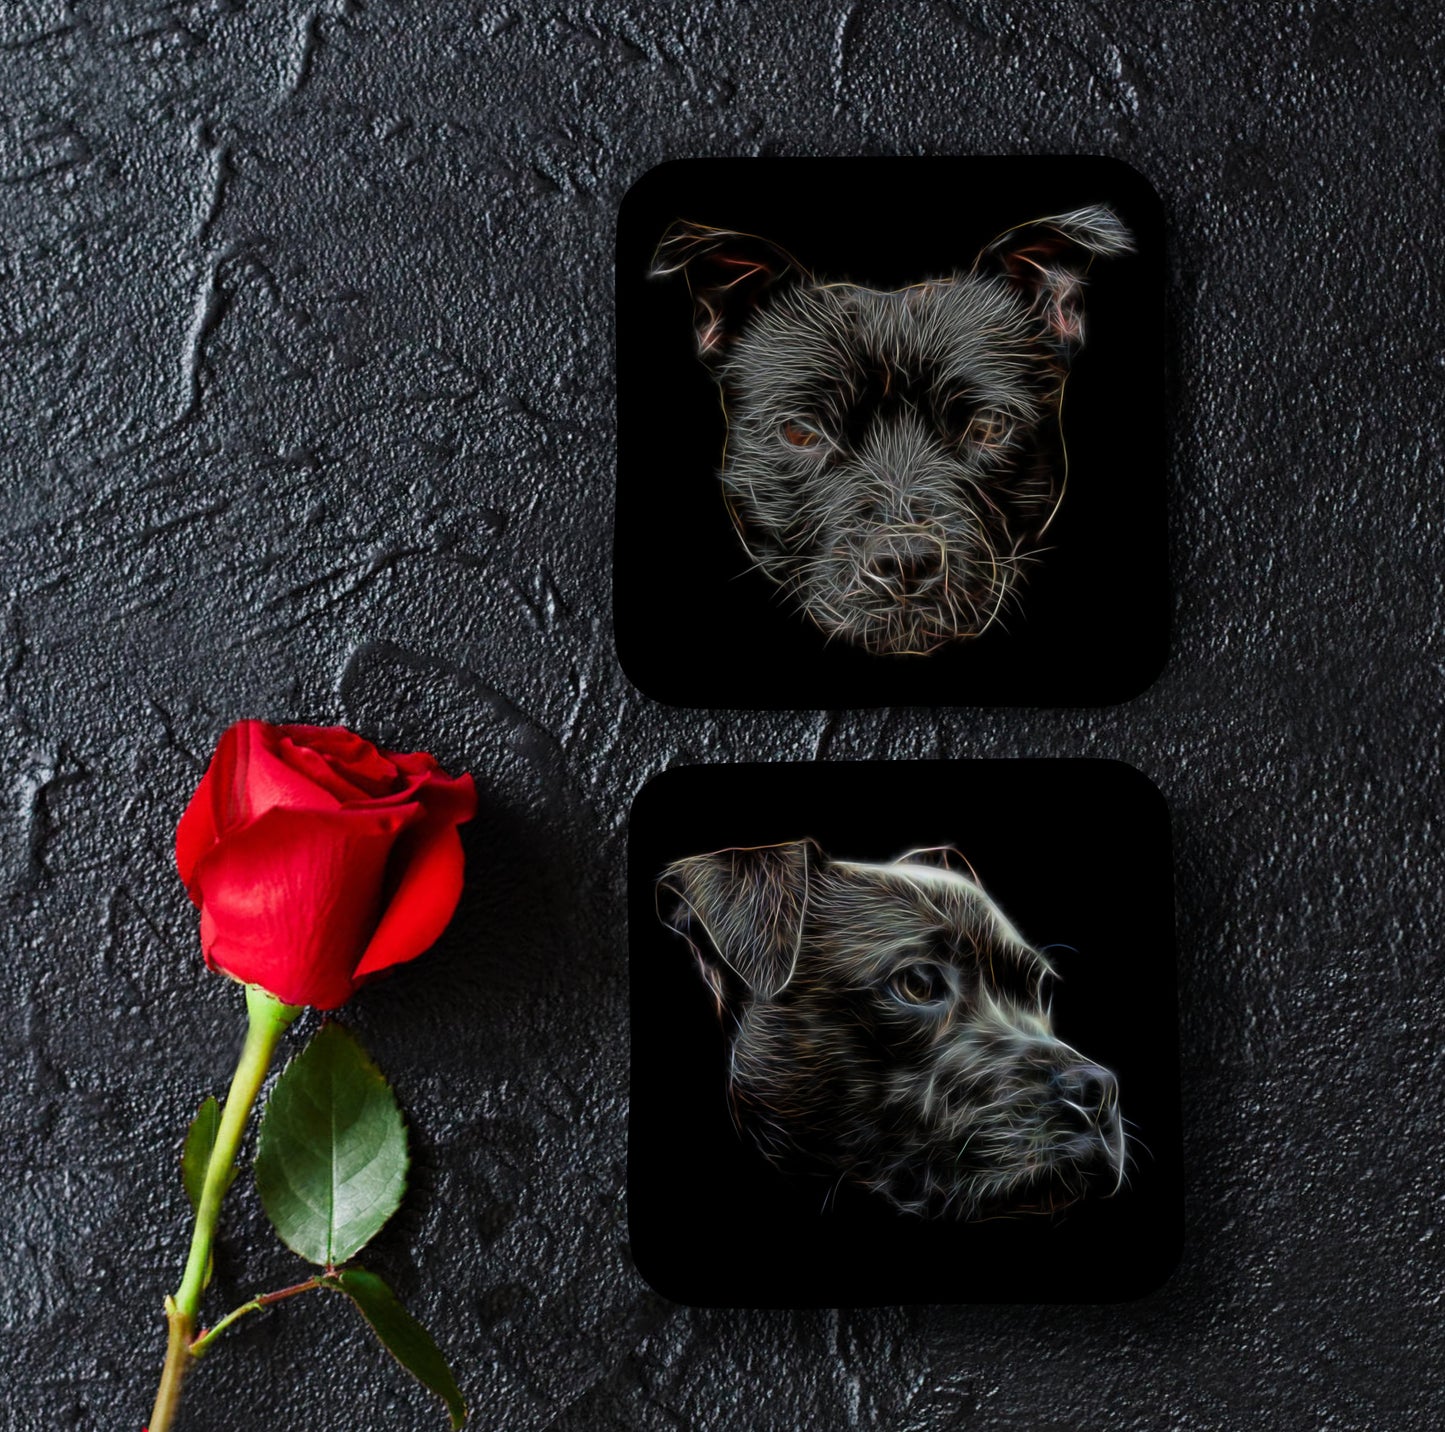 Black Staffordshire Bull Terrier Coasters, Set of 2, with Stunning Fractal Art Design. Perfect Dog Owner Gift.